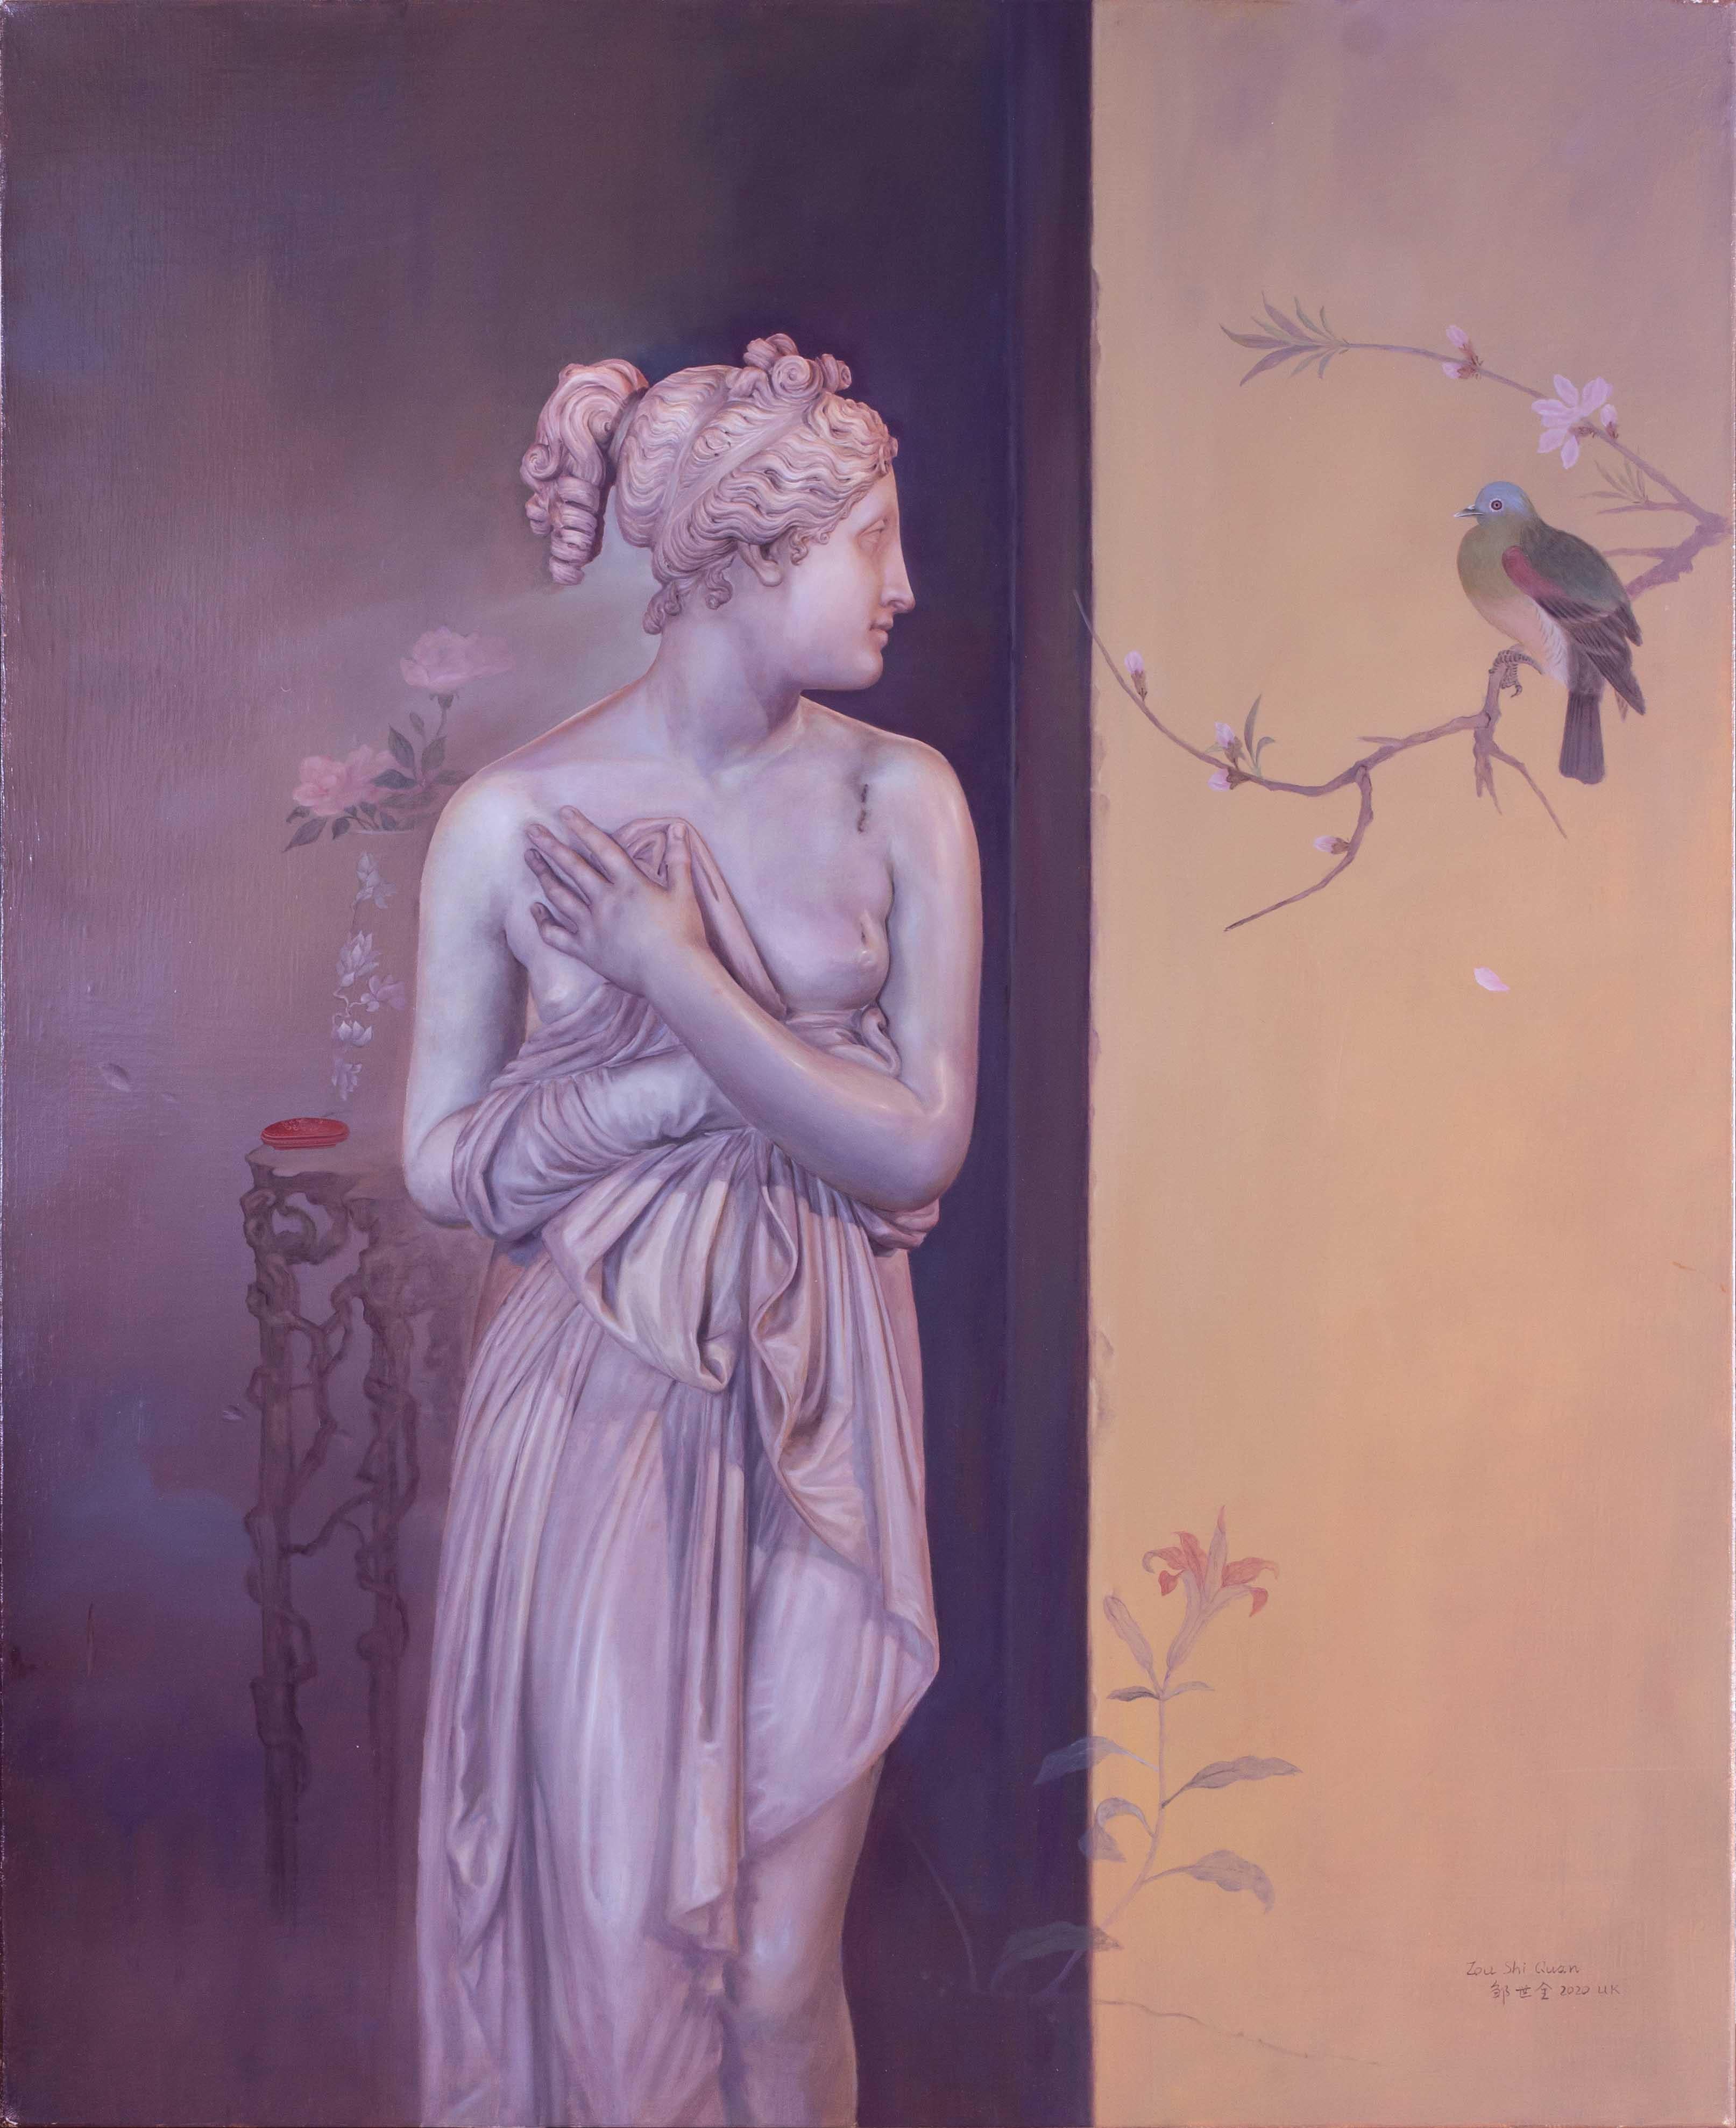 Shiquan Zou Figurative Painting - Chinese, 21st Century oil painting, study of marble statue and birds, in golds